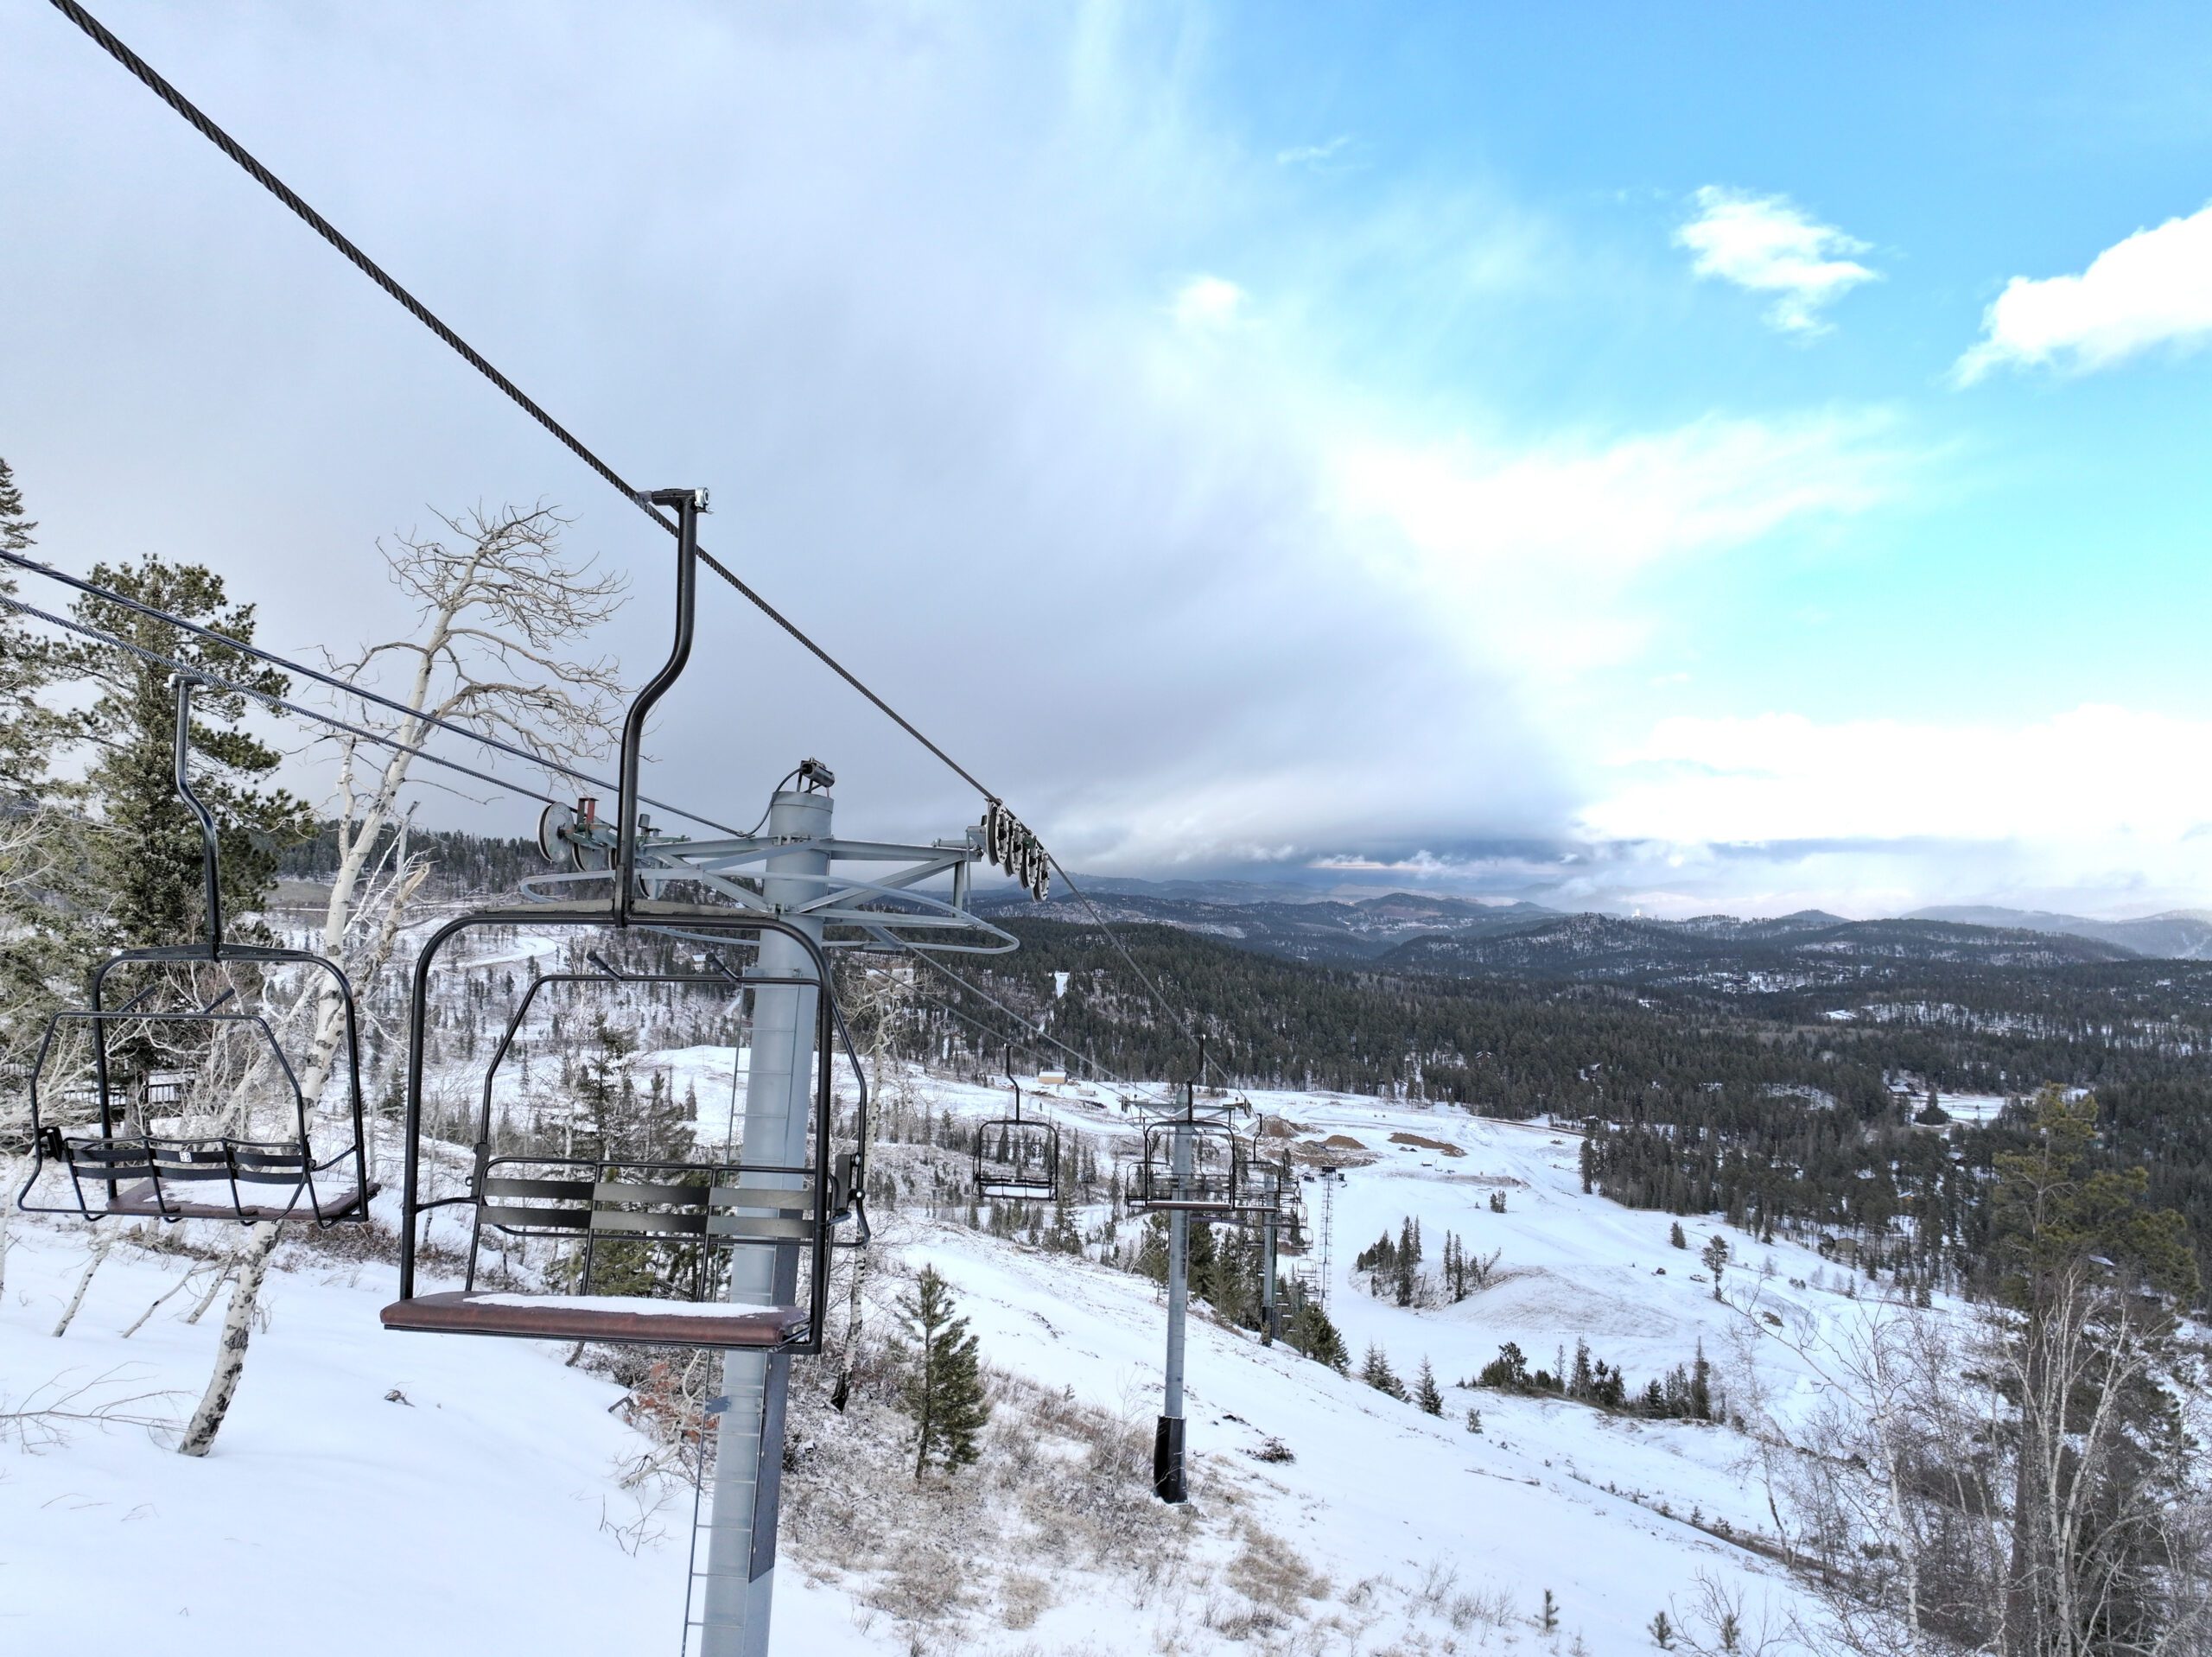 The East Mountain Chairlift Is Up and Running